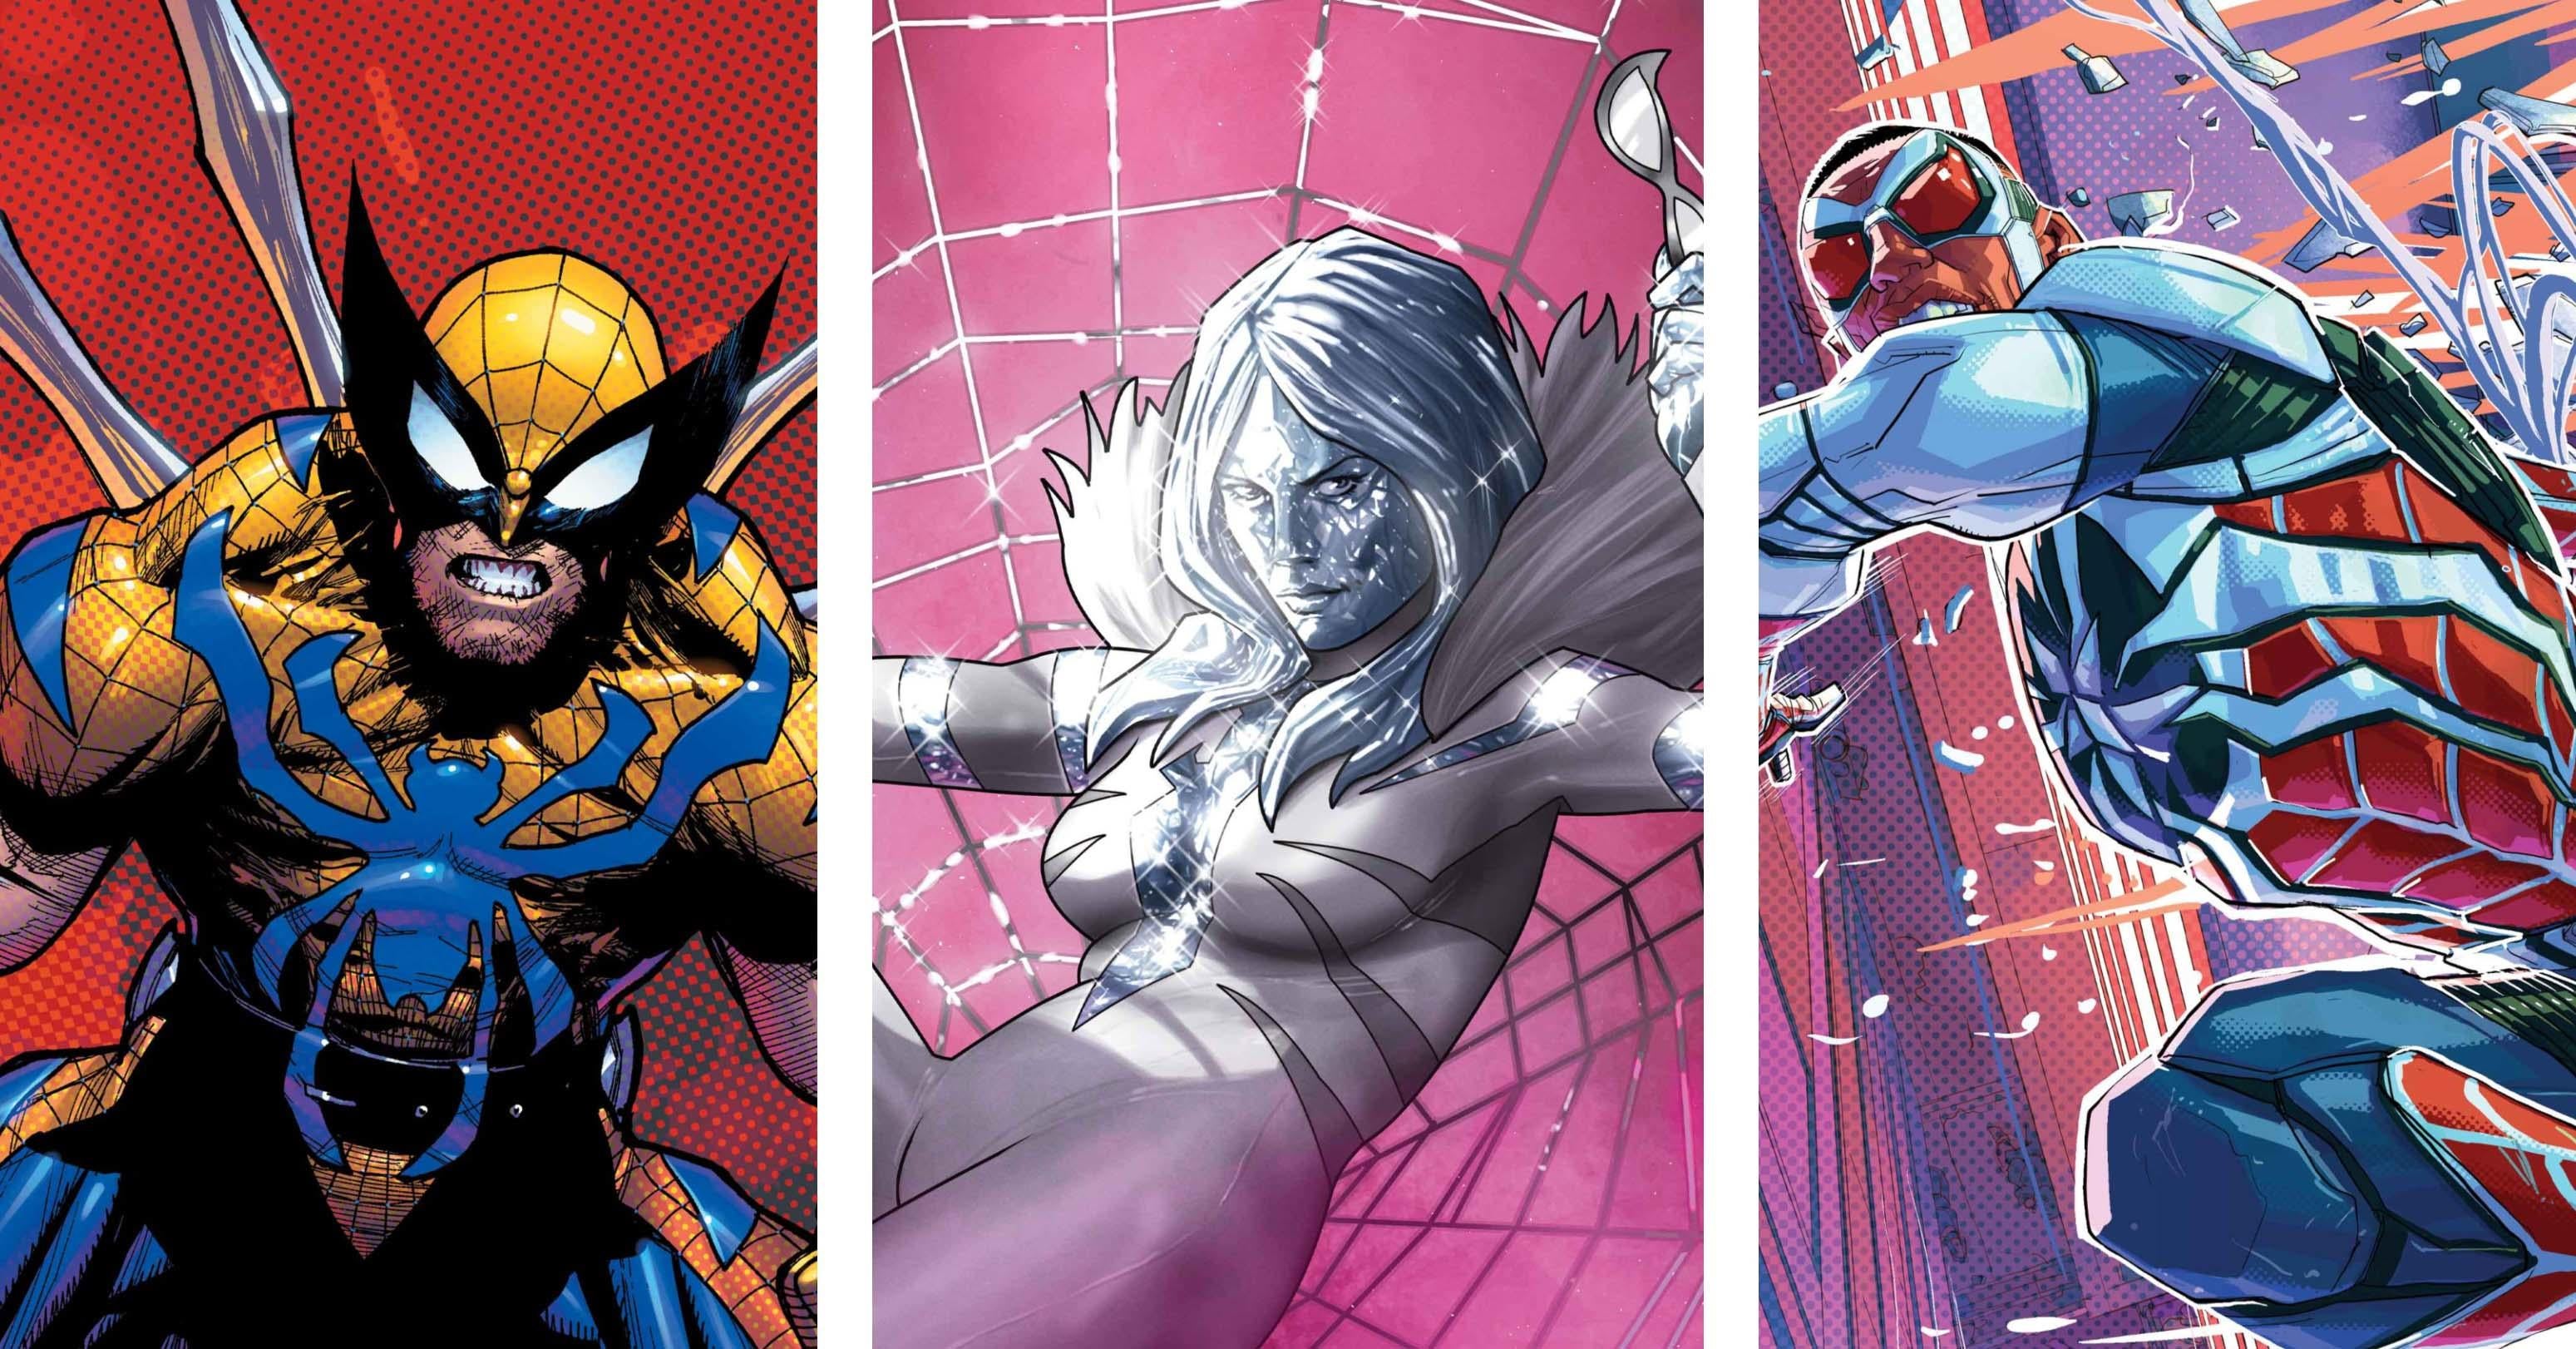 Marvel Subscriptions :: Never miss an issue of Avengers, Spider-Man, X-Men  & more Marvel Comics